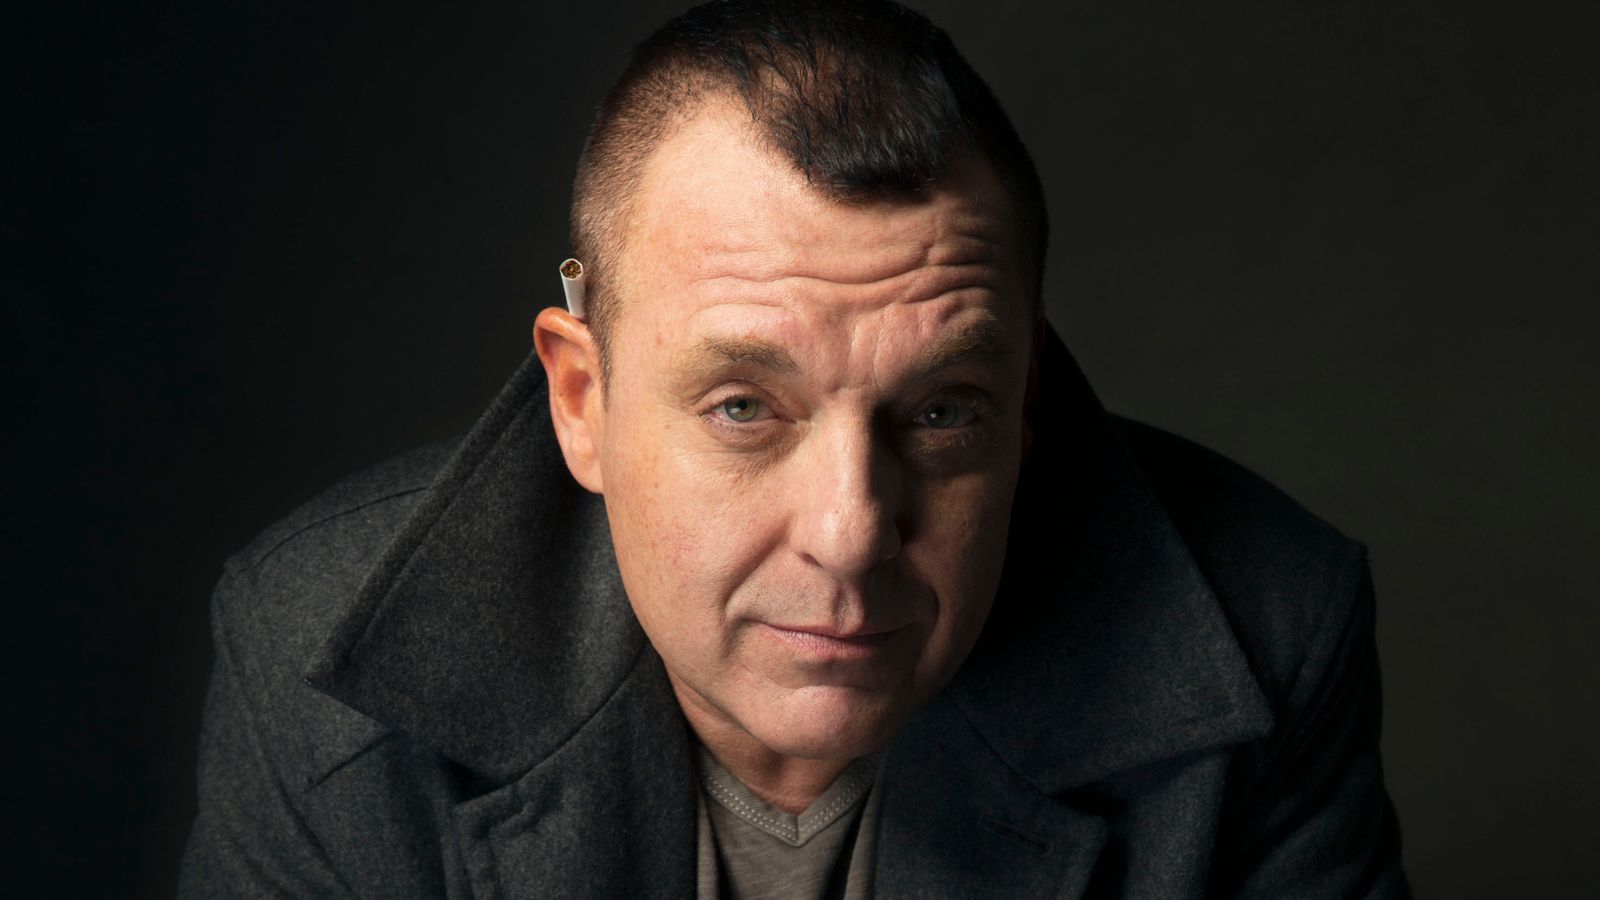 Doctors recommend end-of-life decision for Saving Private Ryan actor Tom Sizemore